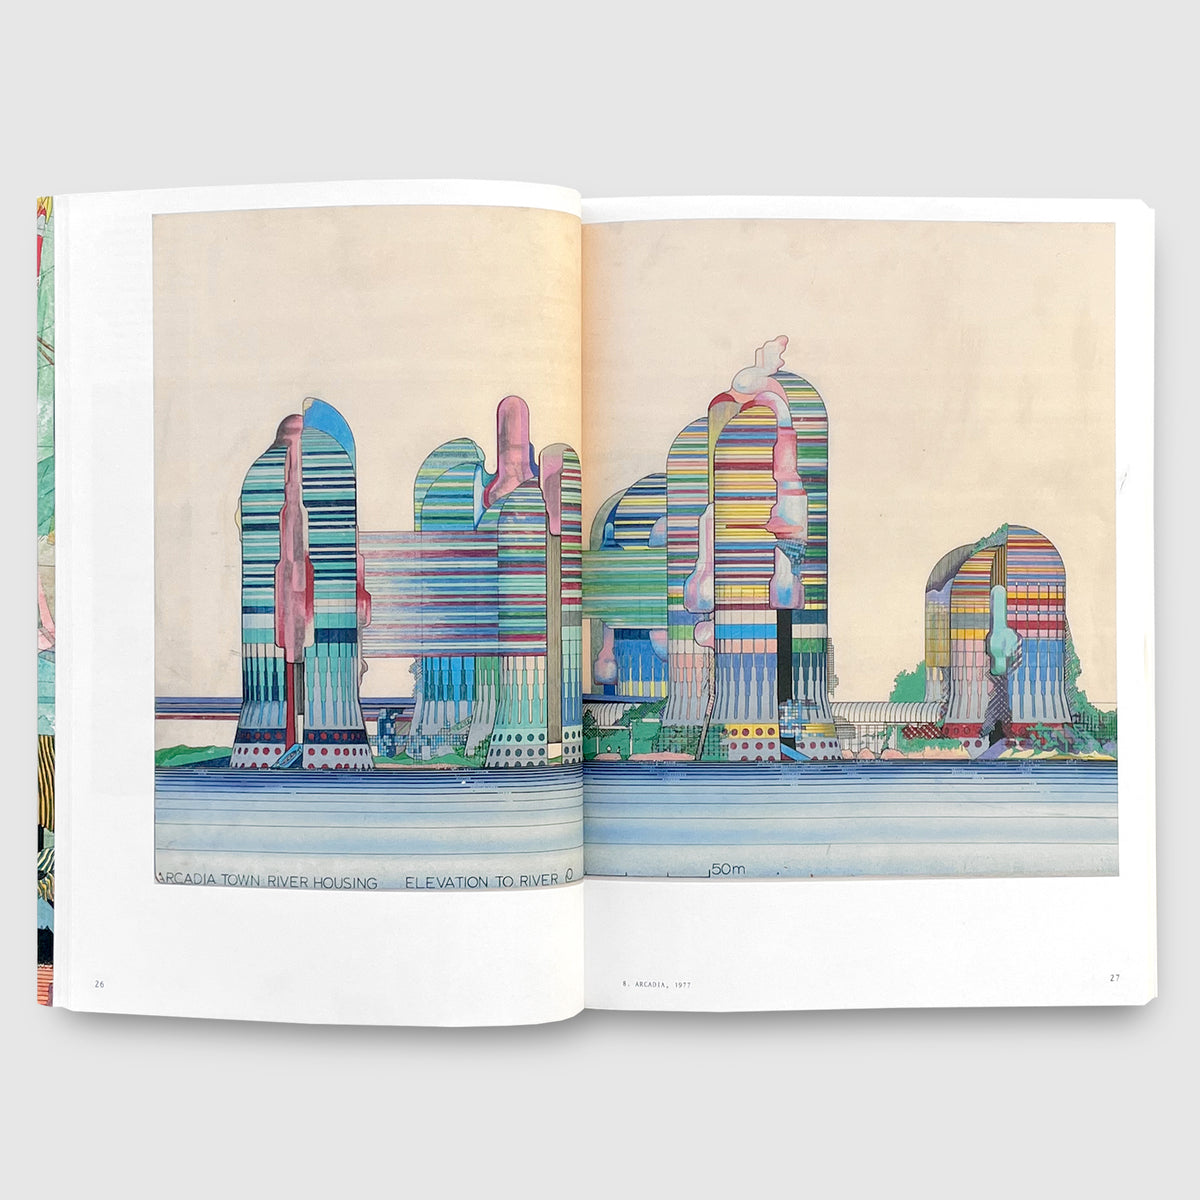 Peter Cook On Paper | Post Architecture Books